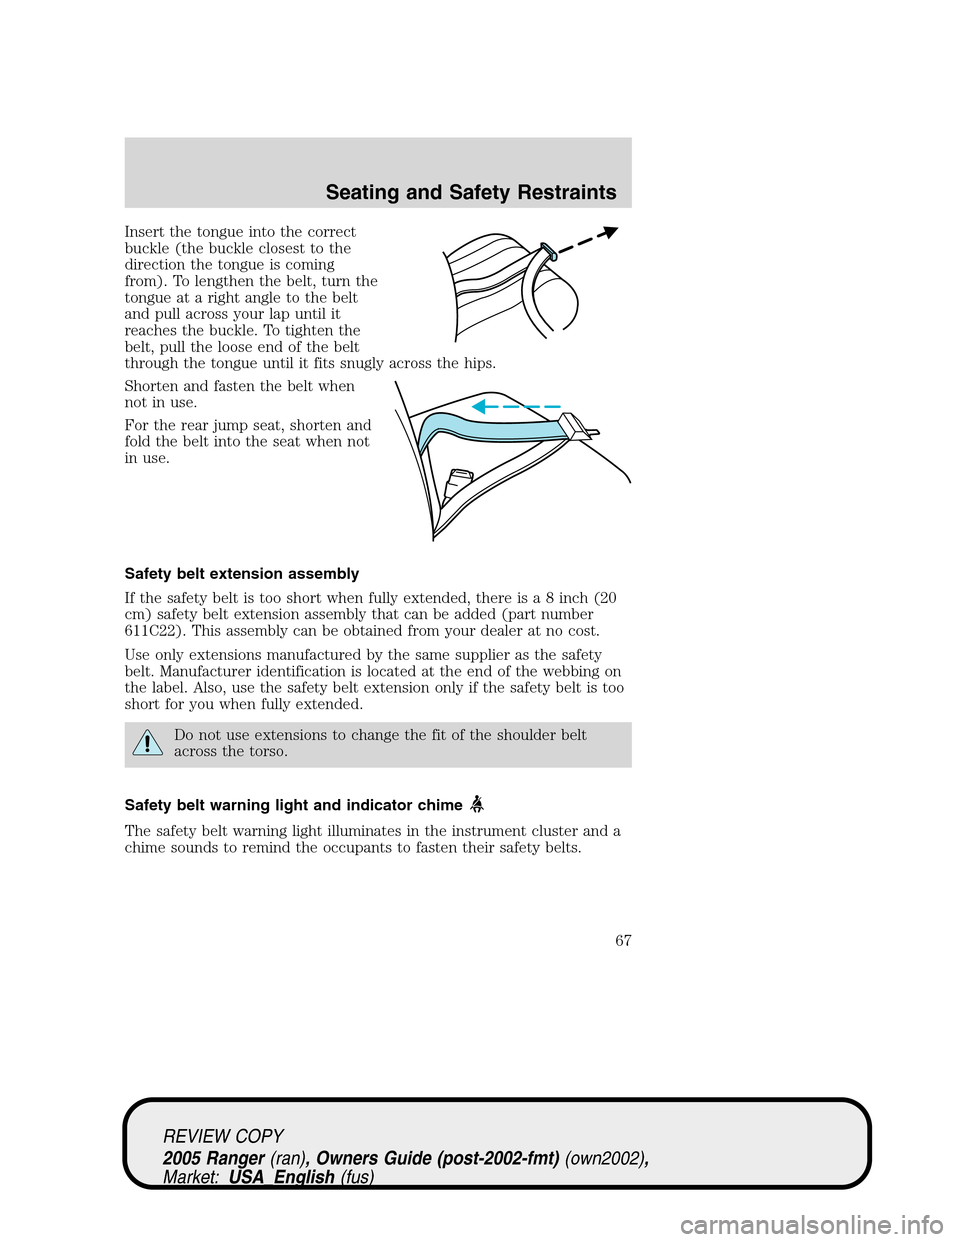 FORD RANGER 2005 2.G Repair Manual Insert the tongue into the correct
buckle (the buckle closest to the
direction the tongue is coming
from). To lengthen the belt, turn the
tongue at a right angle to the belt
and pull across your lap u